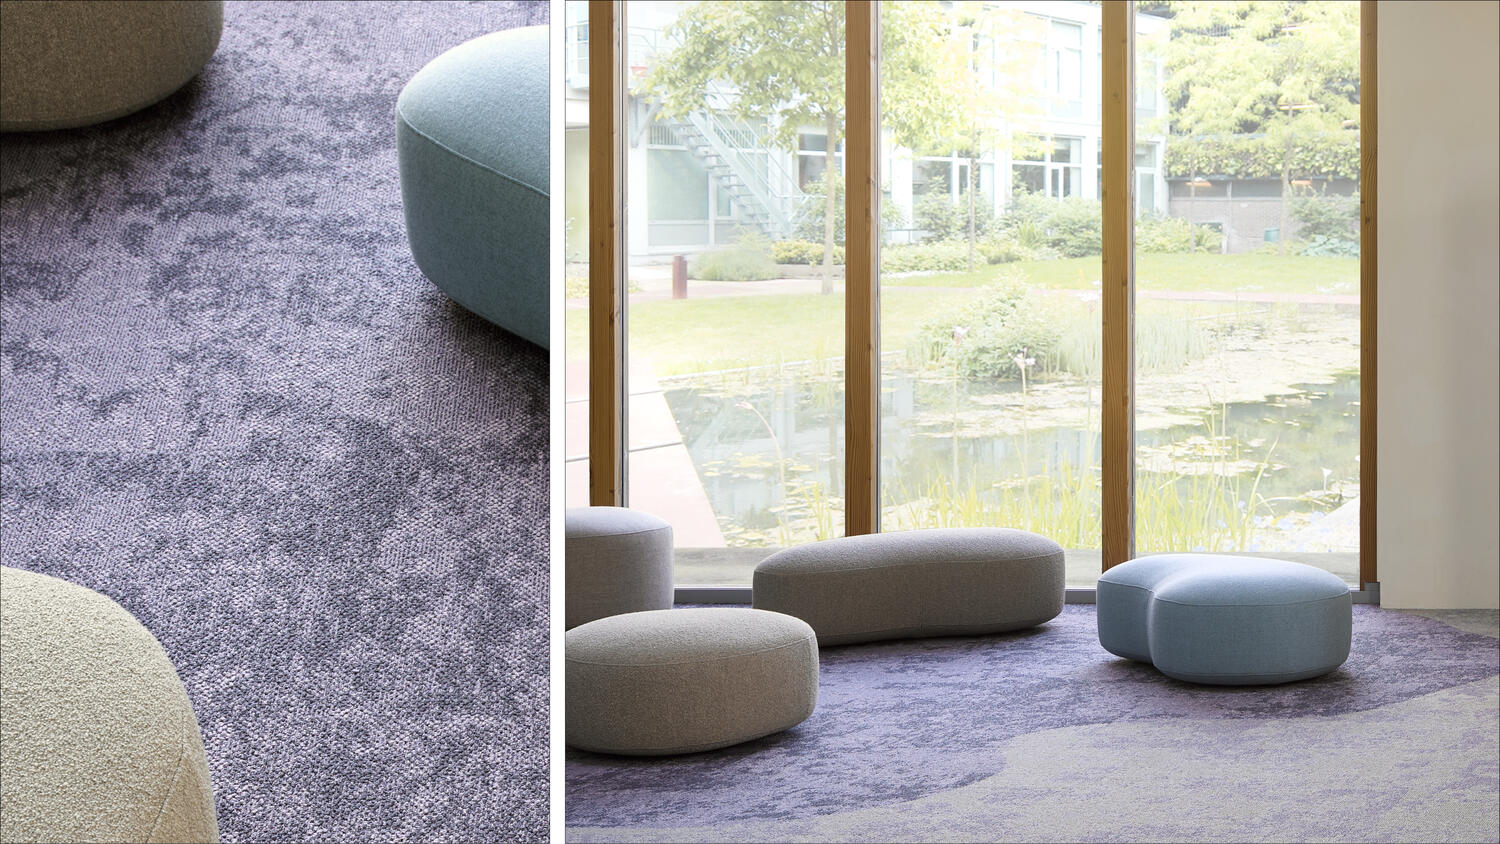 Two images showcasing the colorful desso grezzo carpet tiles with organic patters for interior spaces